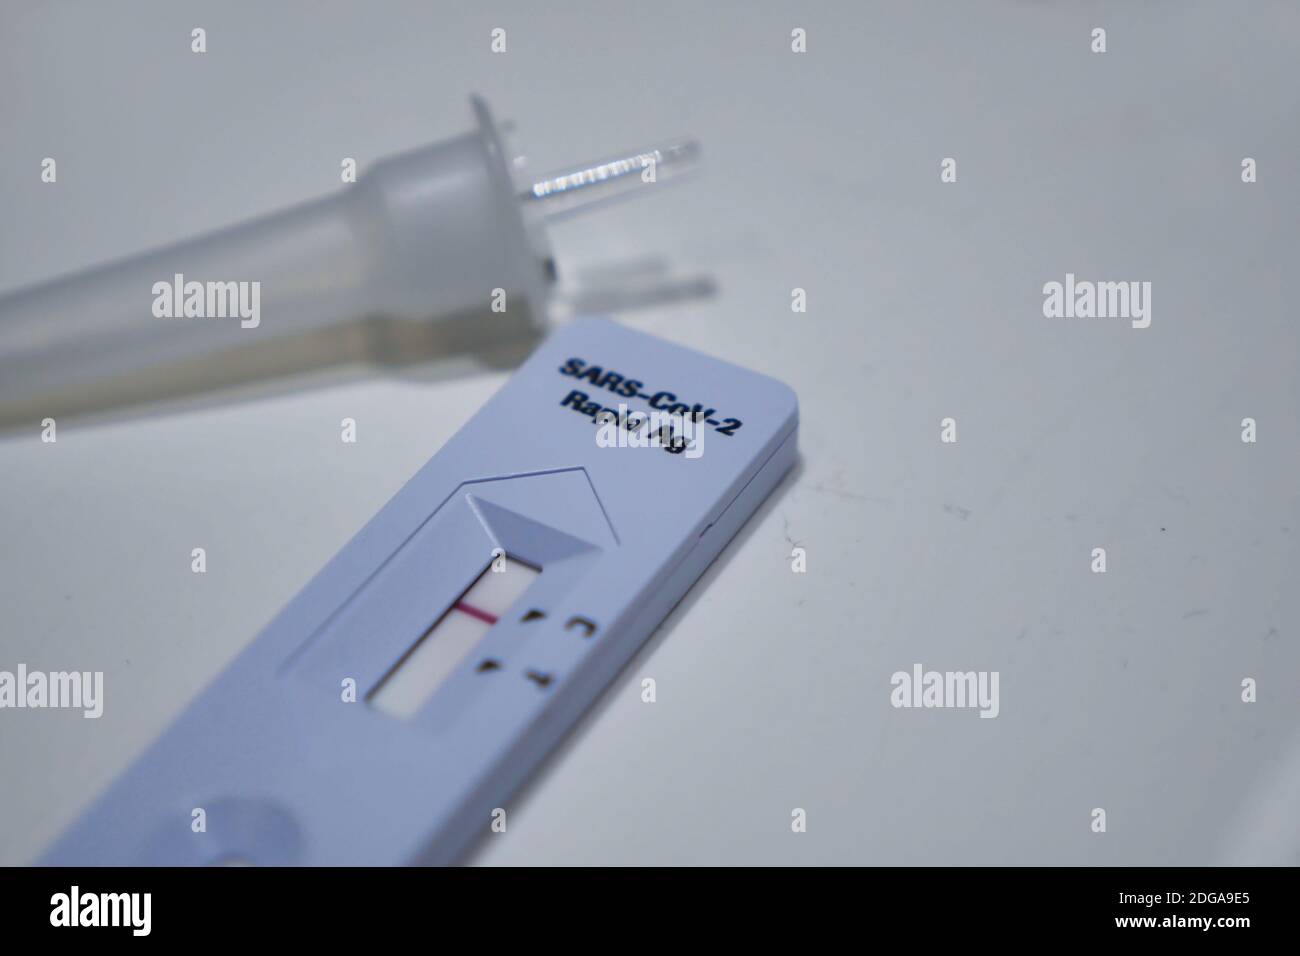 Covid-19 antigen test device on table surface. High angle view. Stock Photo